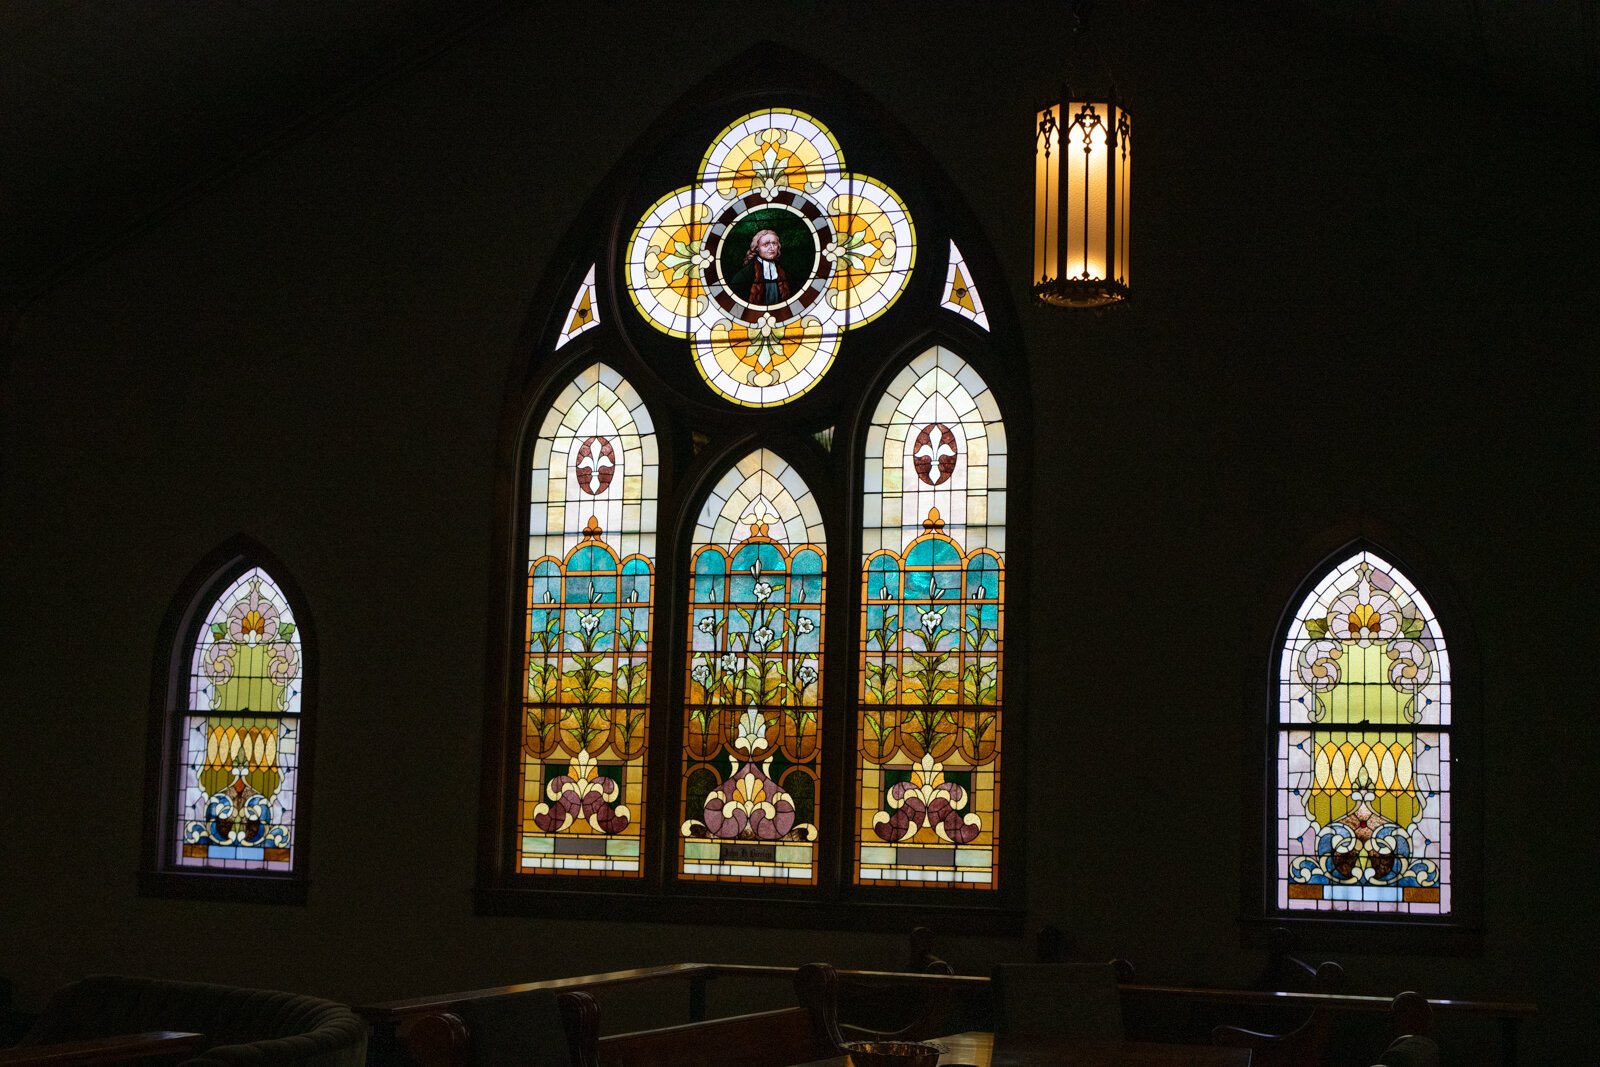 The Sanctuary is a renovated 1903 Gothic-style church that's been converted to an Airbnb and event venue blocks away from historic downtown Wabash.